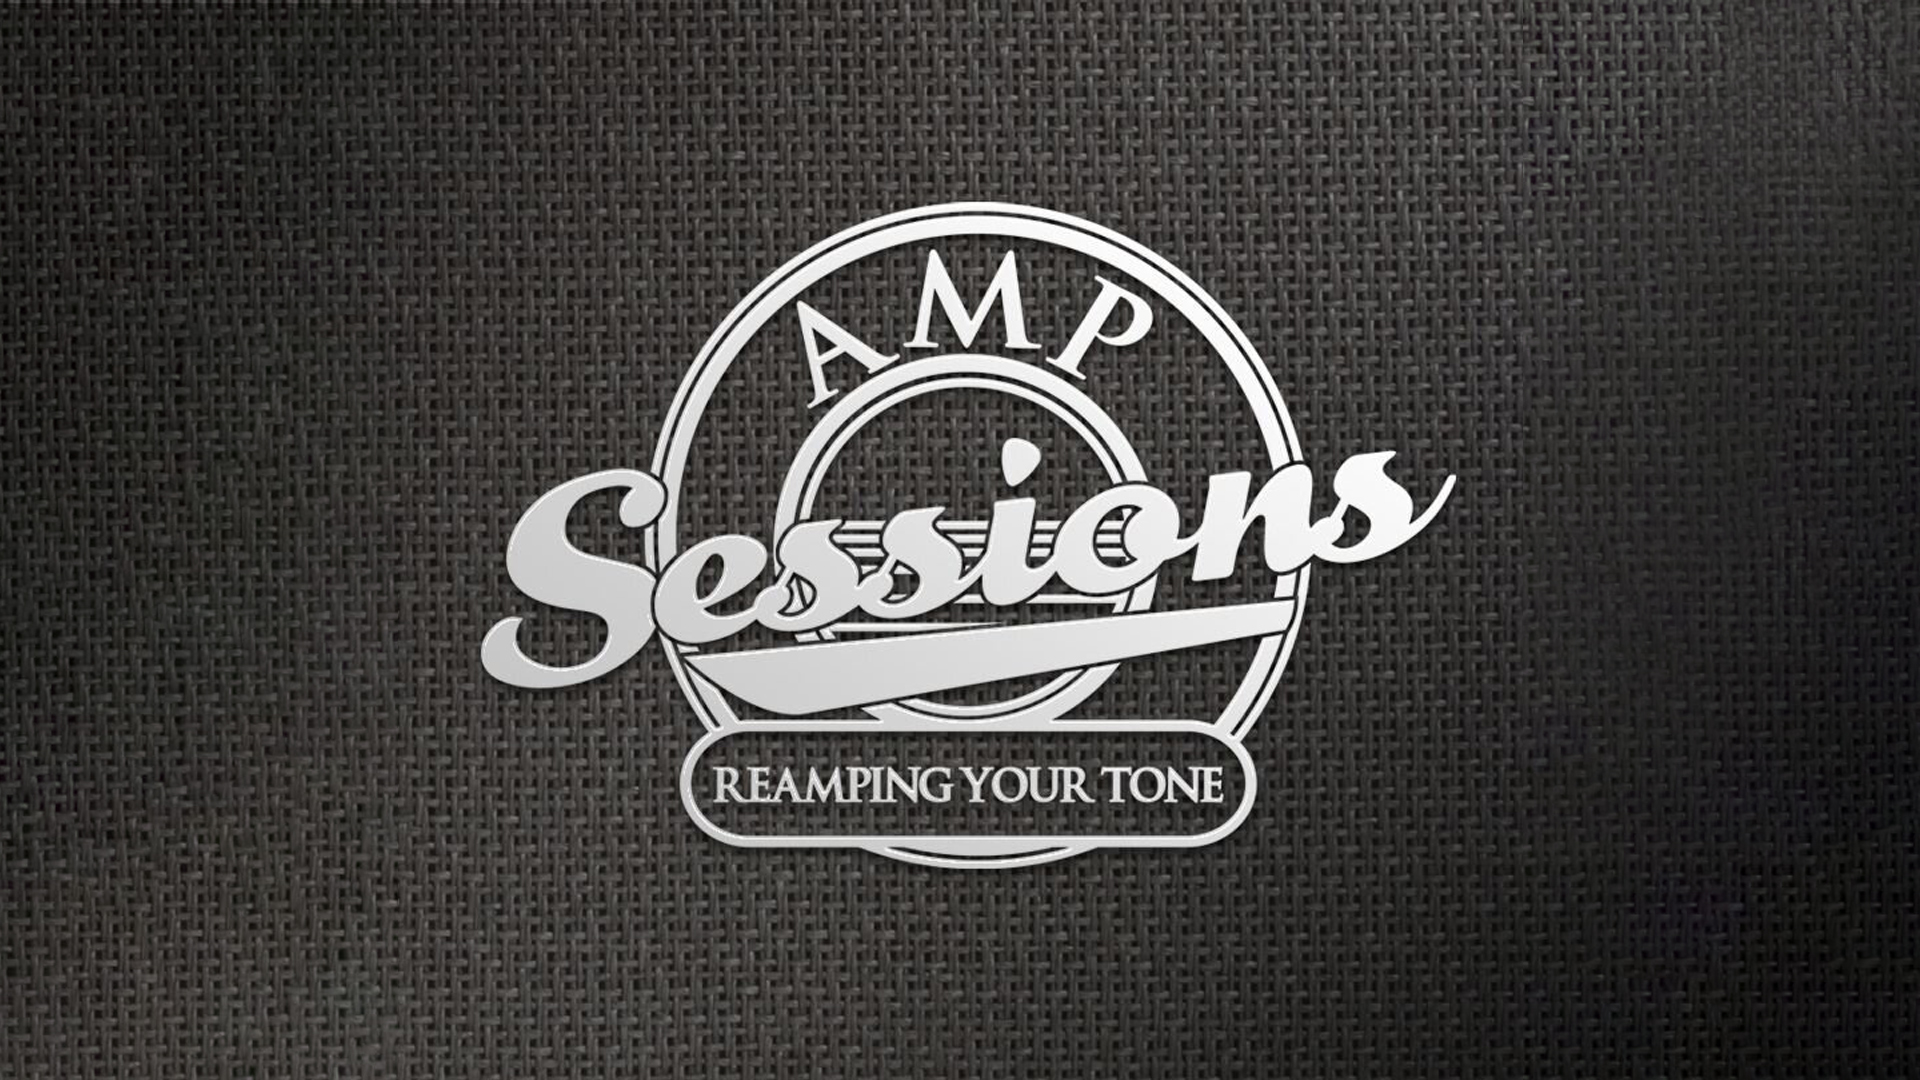 AmpSessions